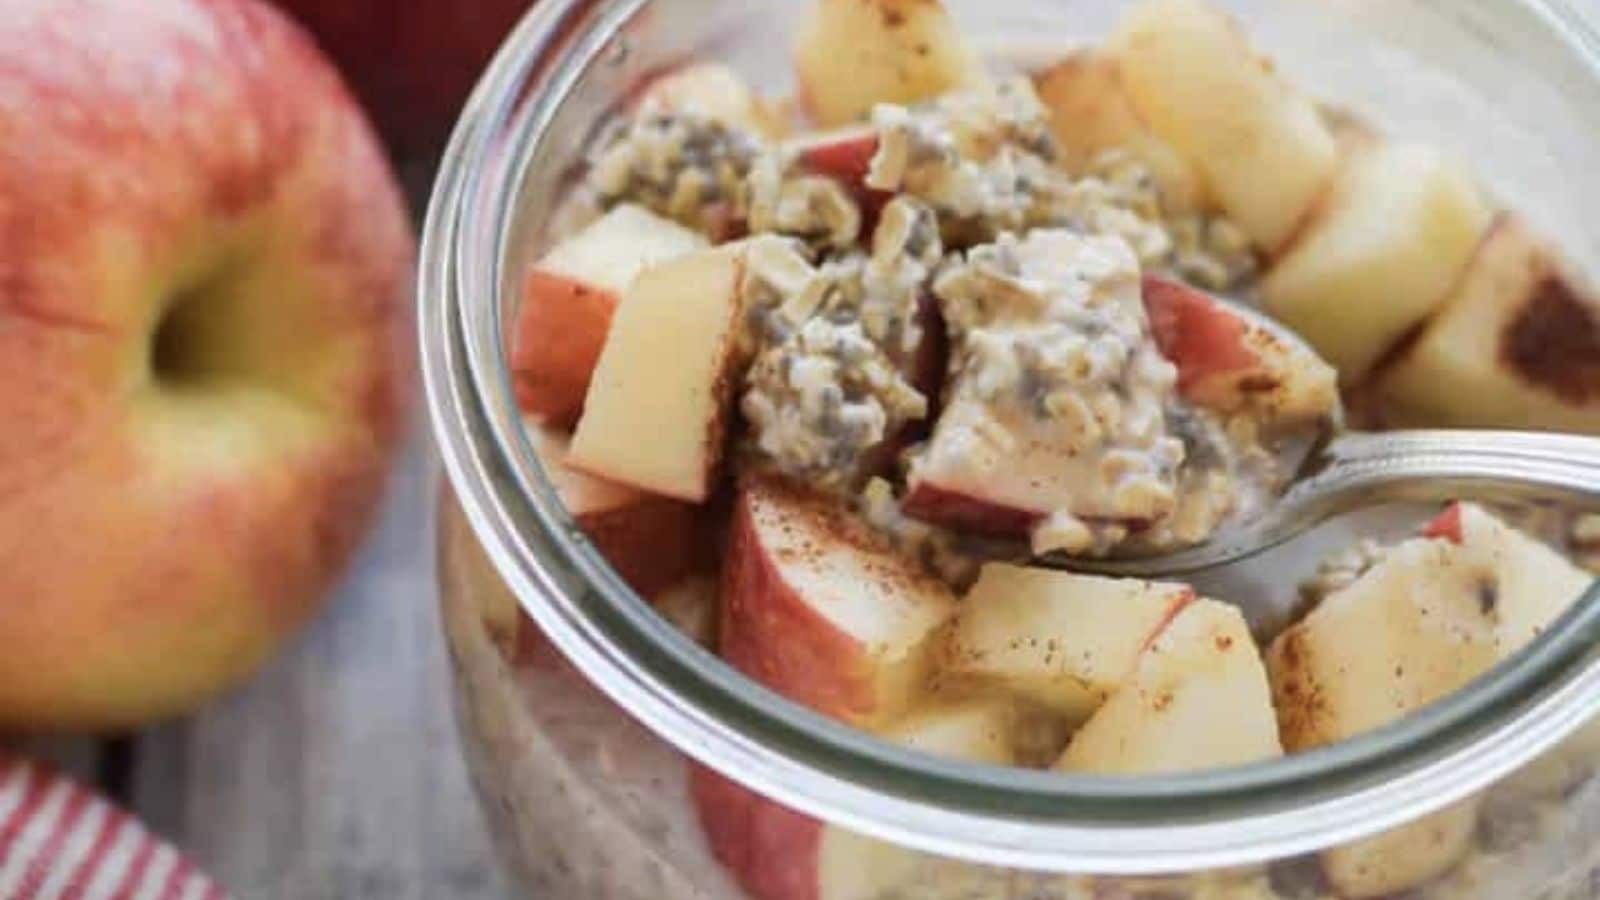 Spoon dipped into apple overnight oats.
